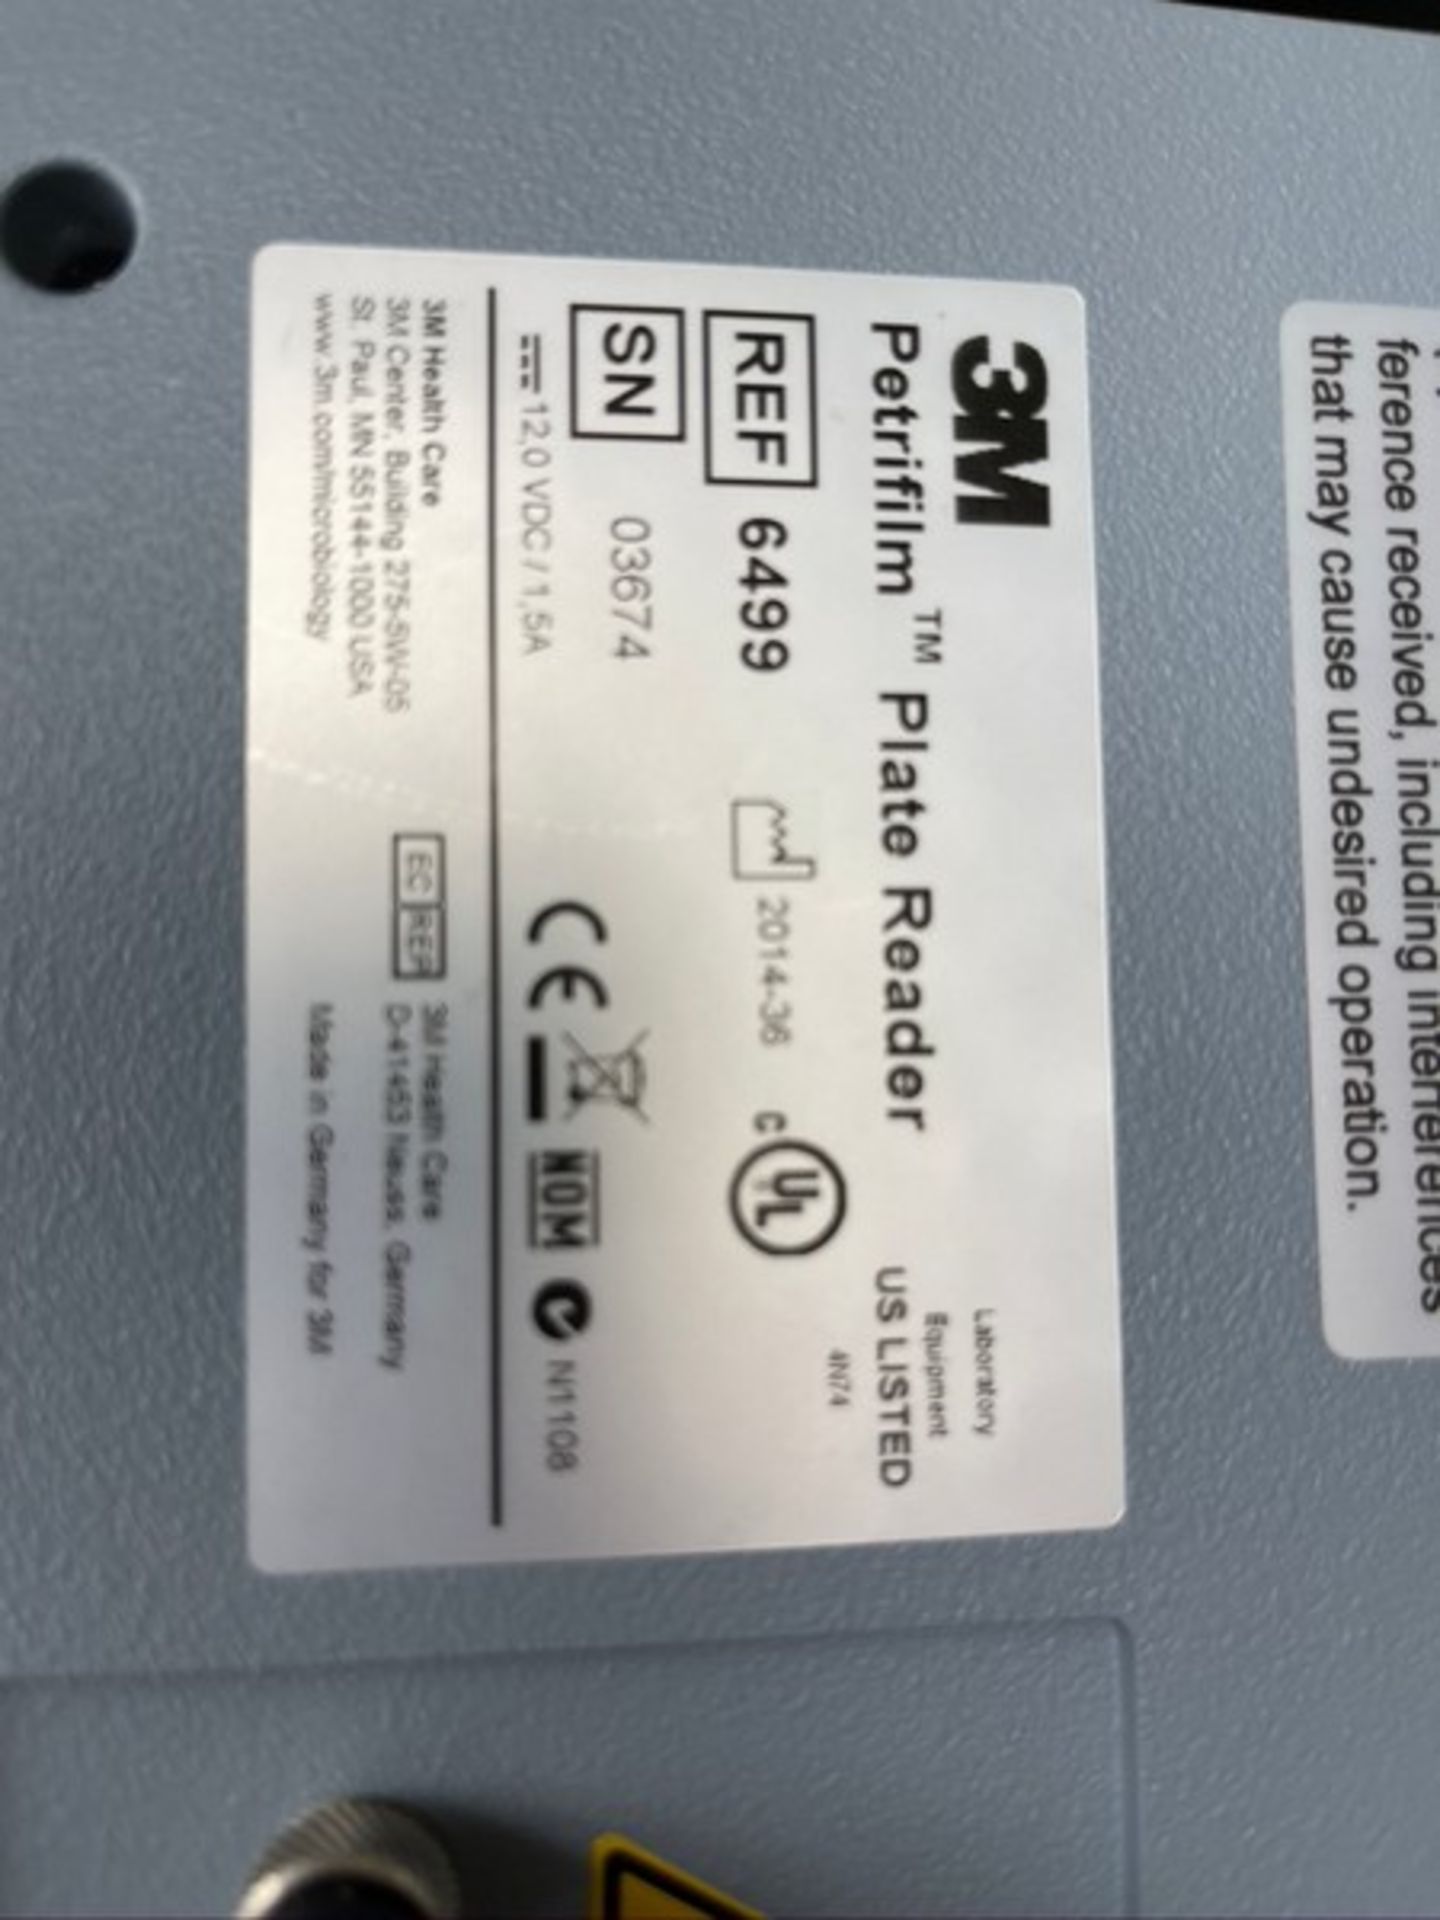 3M PETRIFILM PLATE READER, S/N 03674 (RIGGING, SITE MANAGEMENT AND LOADING FEE $10.00) (DOES NOT - Image 3 of 4